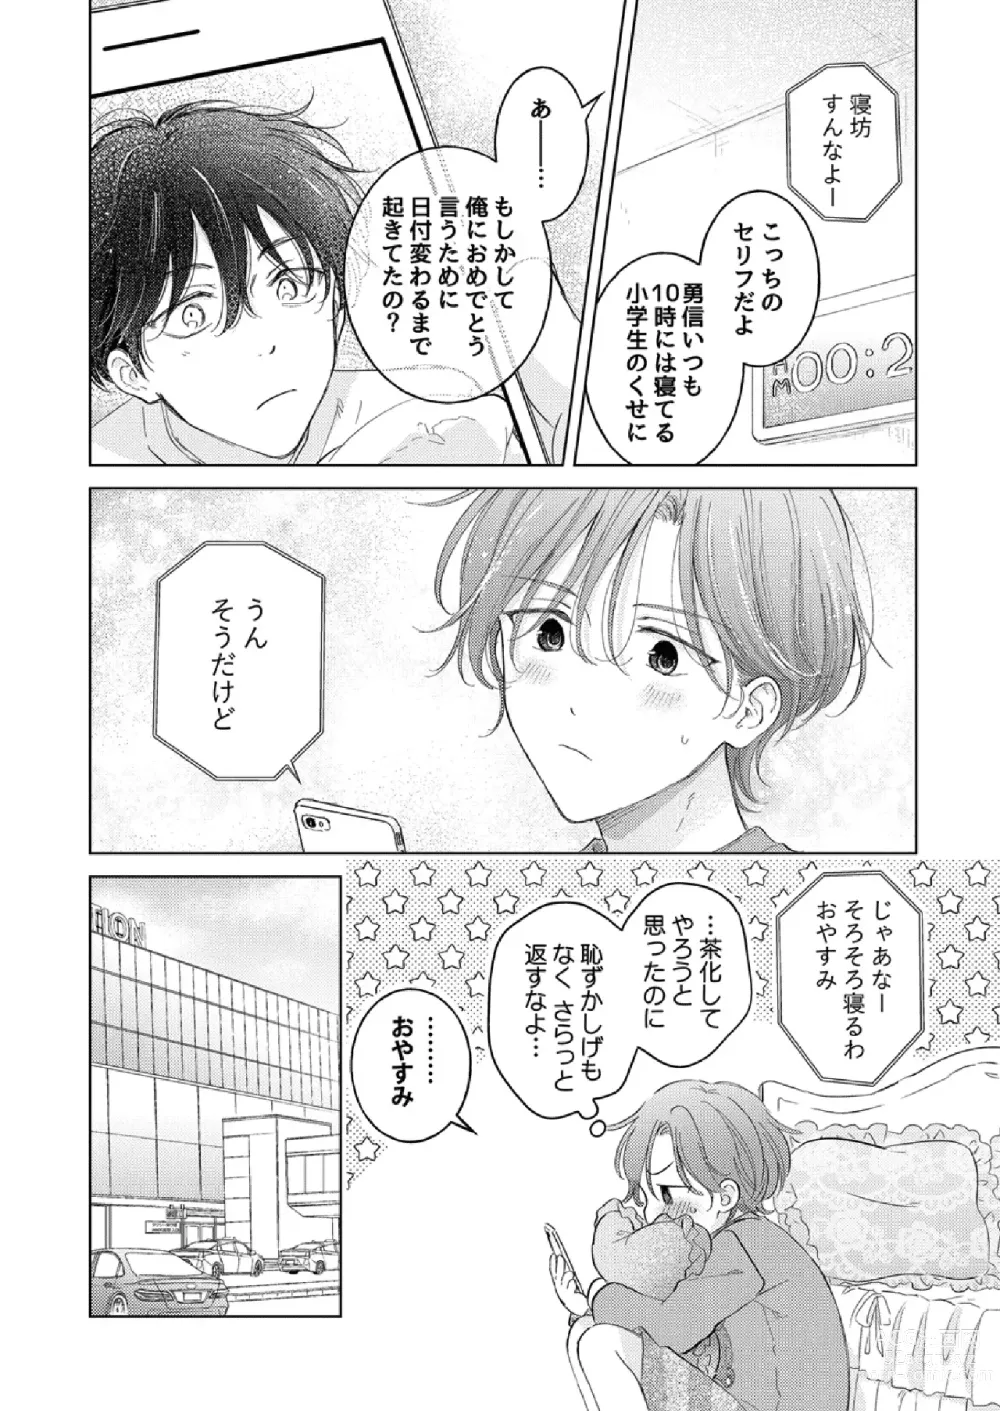 Page 4 of doujinshi How to use Gender-Changing Apps Properly 2